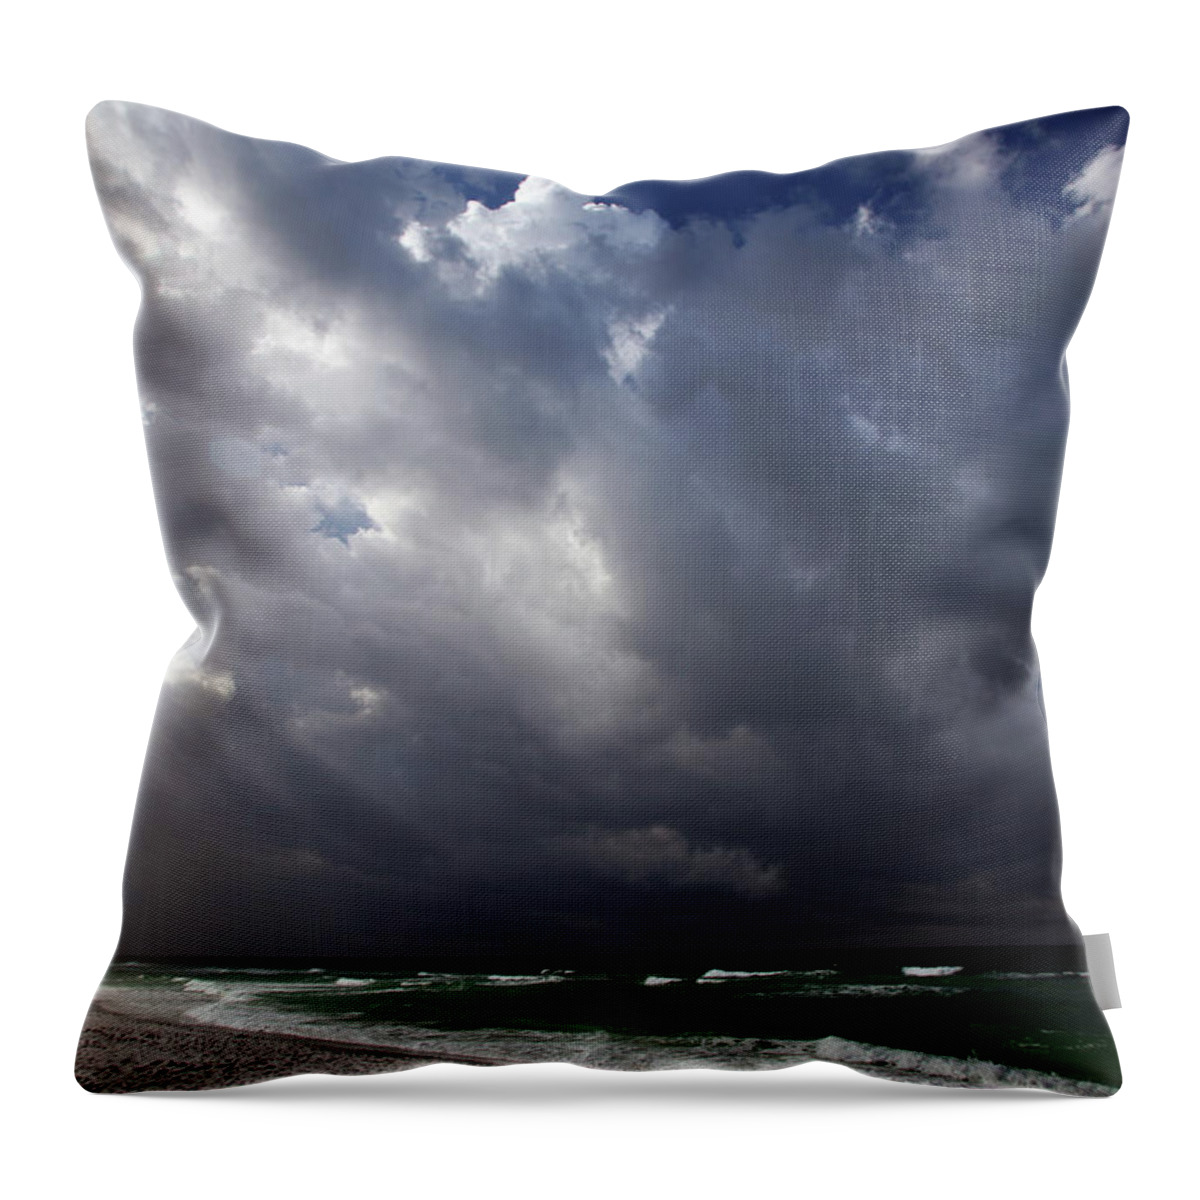 Water's Edge Throw Pillow featuring the photograph Storm Slams Coast by Shanekato